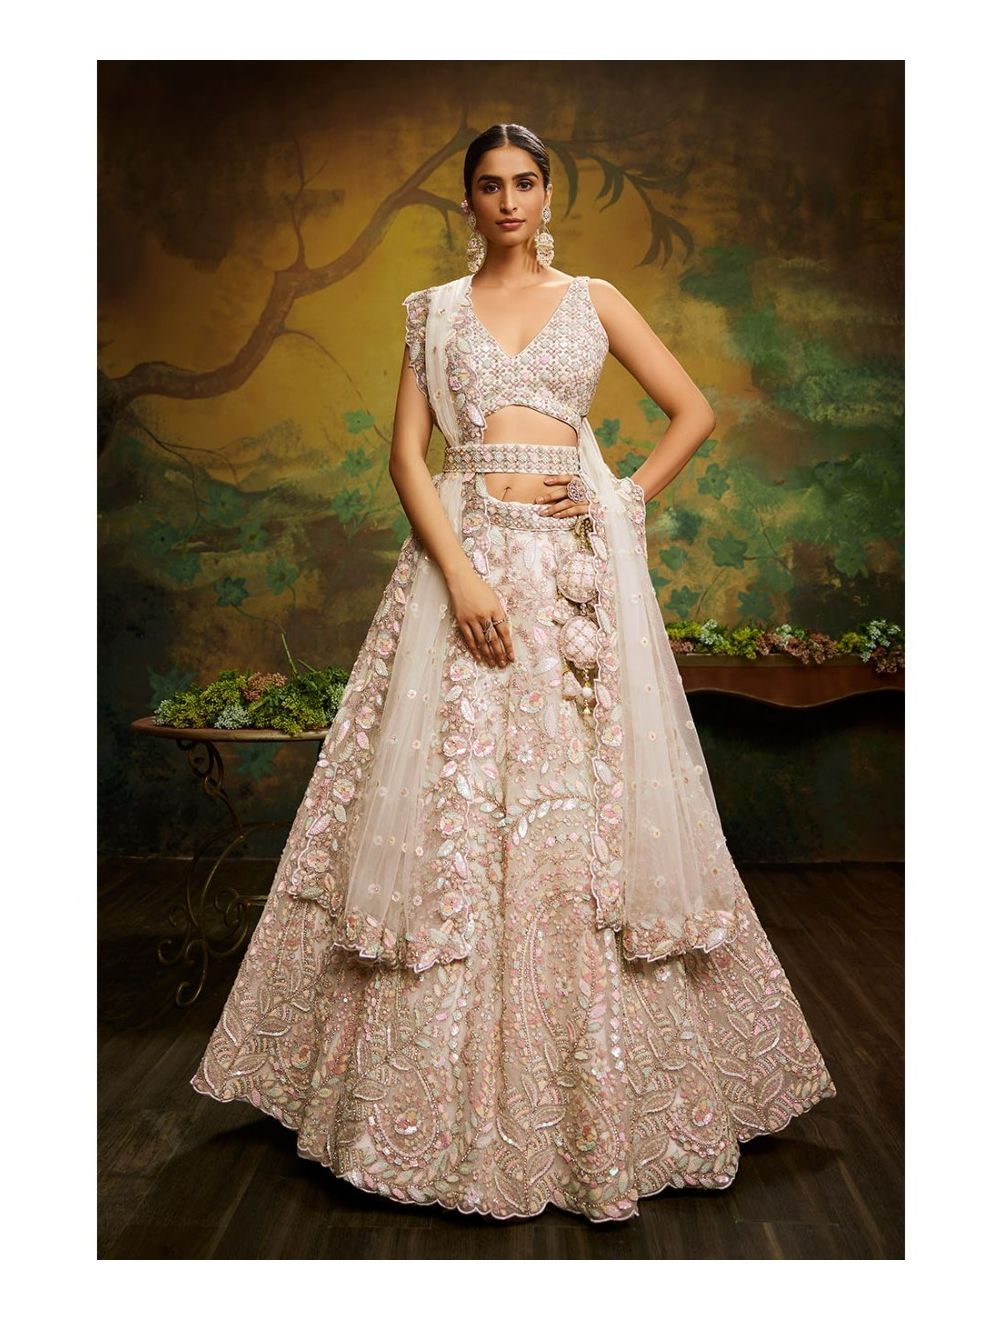 Aggregate 190+ lehenga for wedding party best